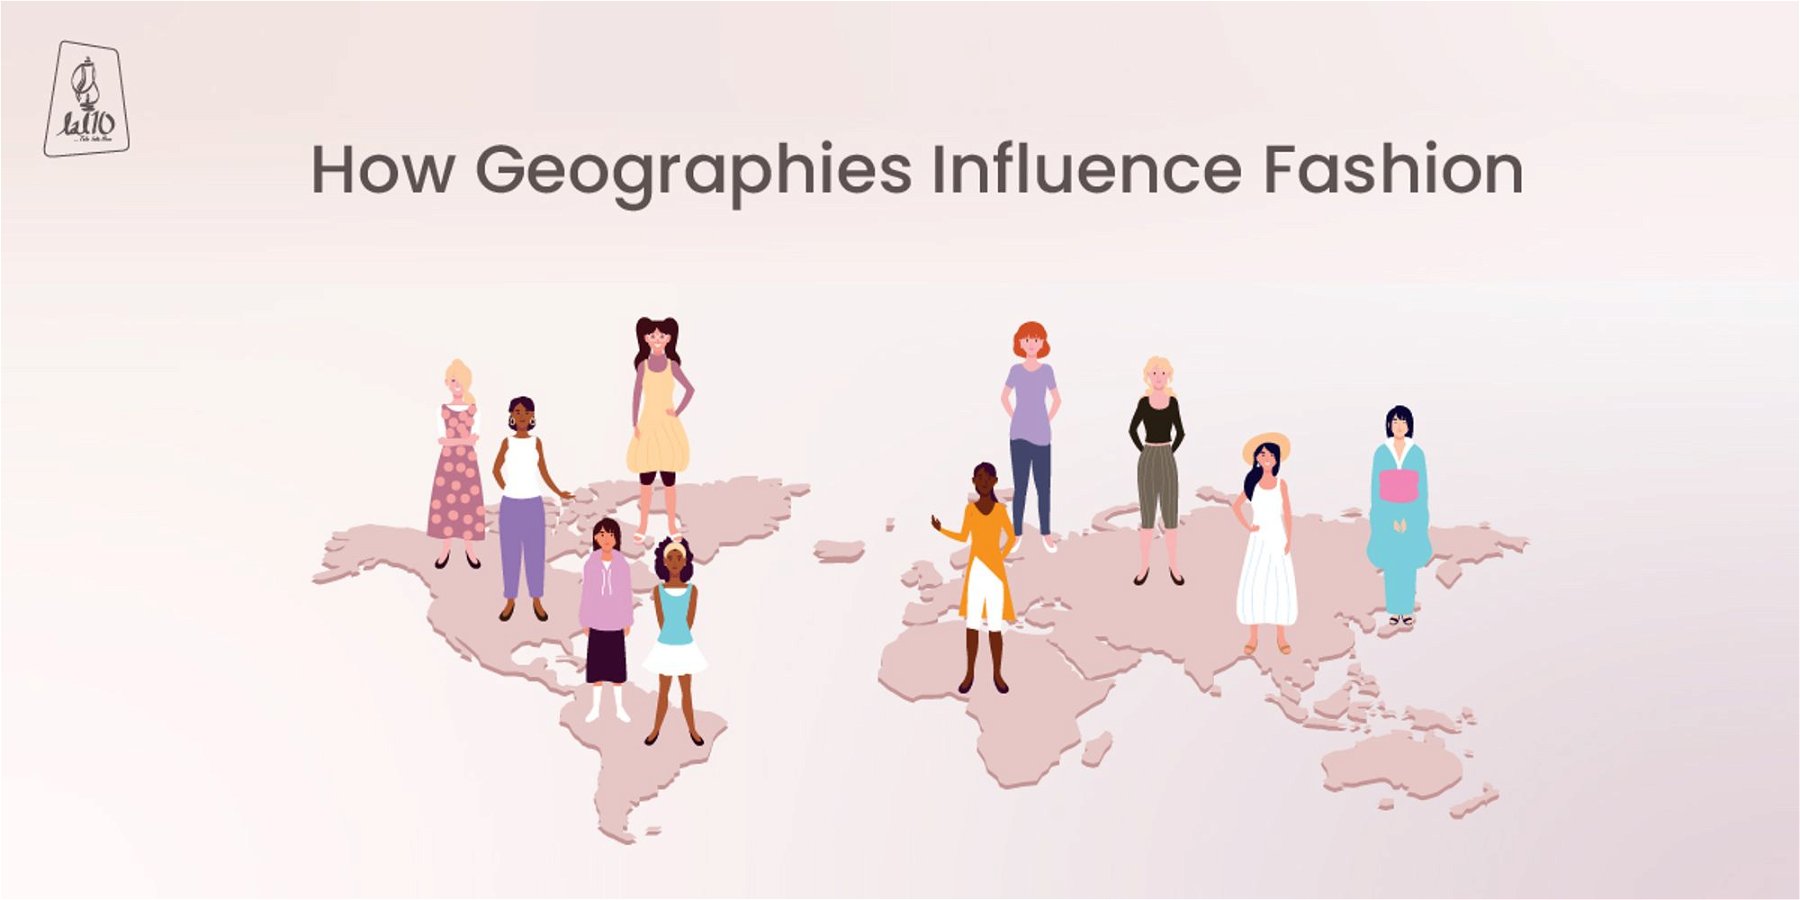 How geographies influence fashion